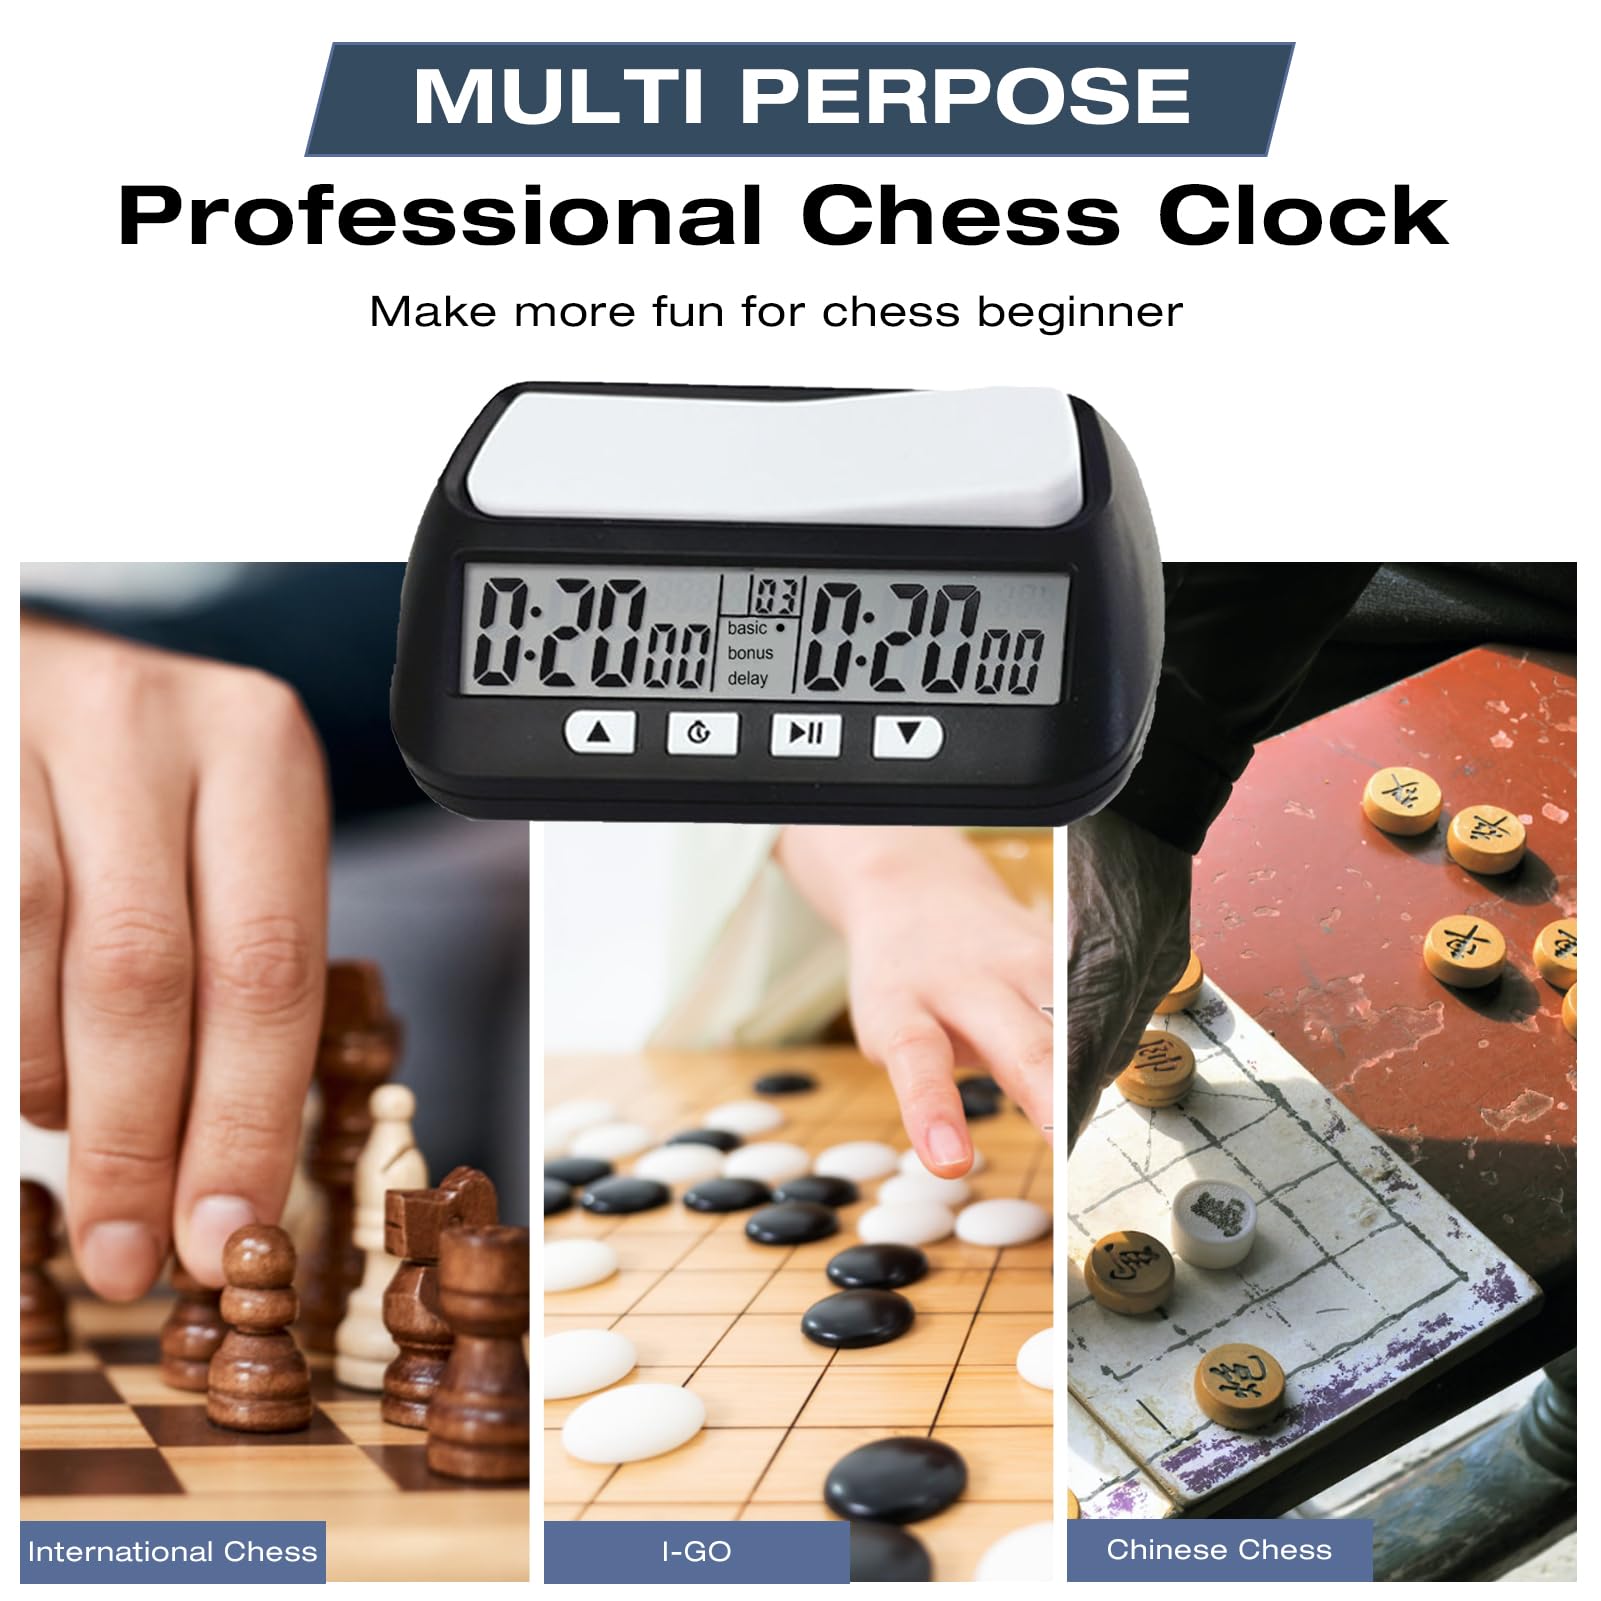 HEEPDD Chess Clock Digital Chess Timer, Portable Digital Chess Clock Game Timer with Basic Bonus Delay Alarm Function for Board Games